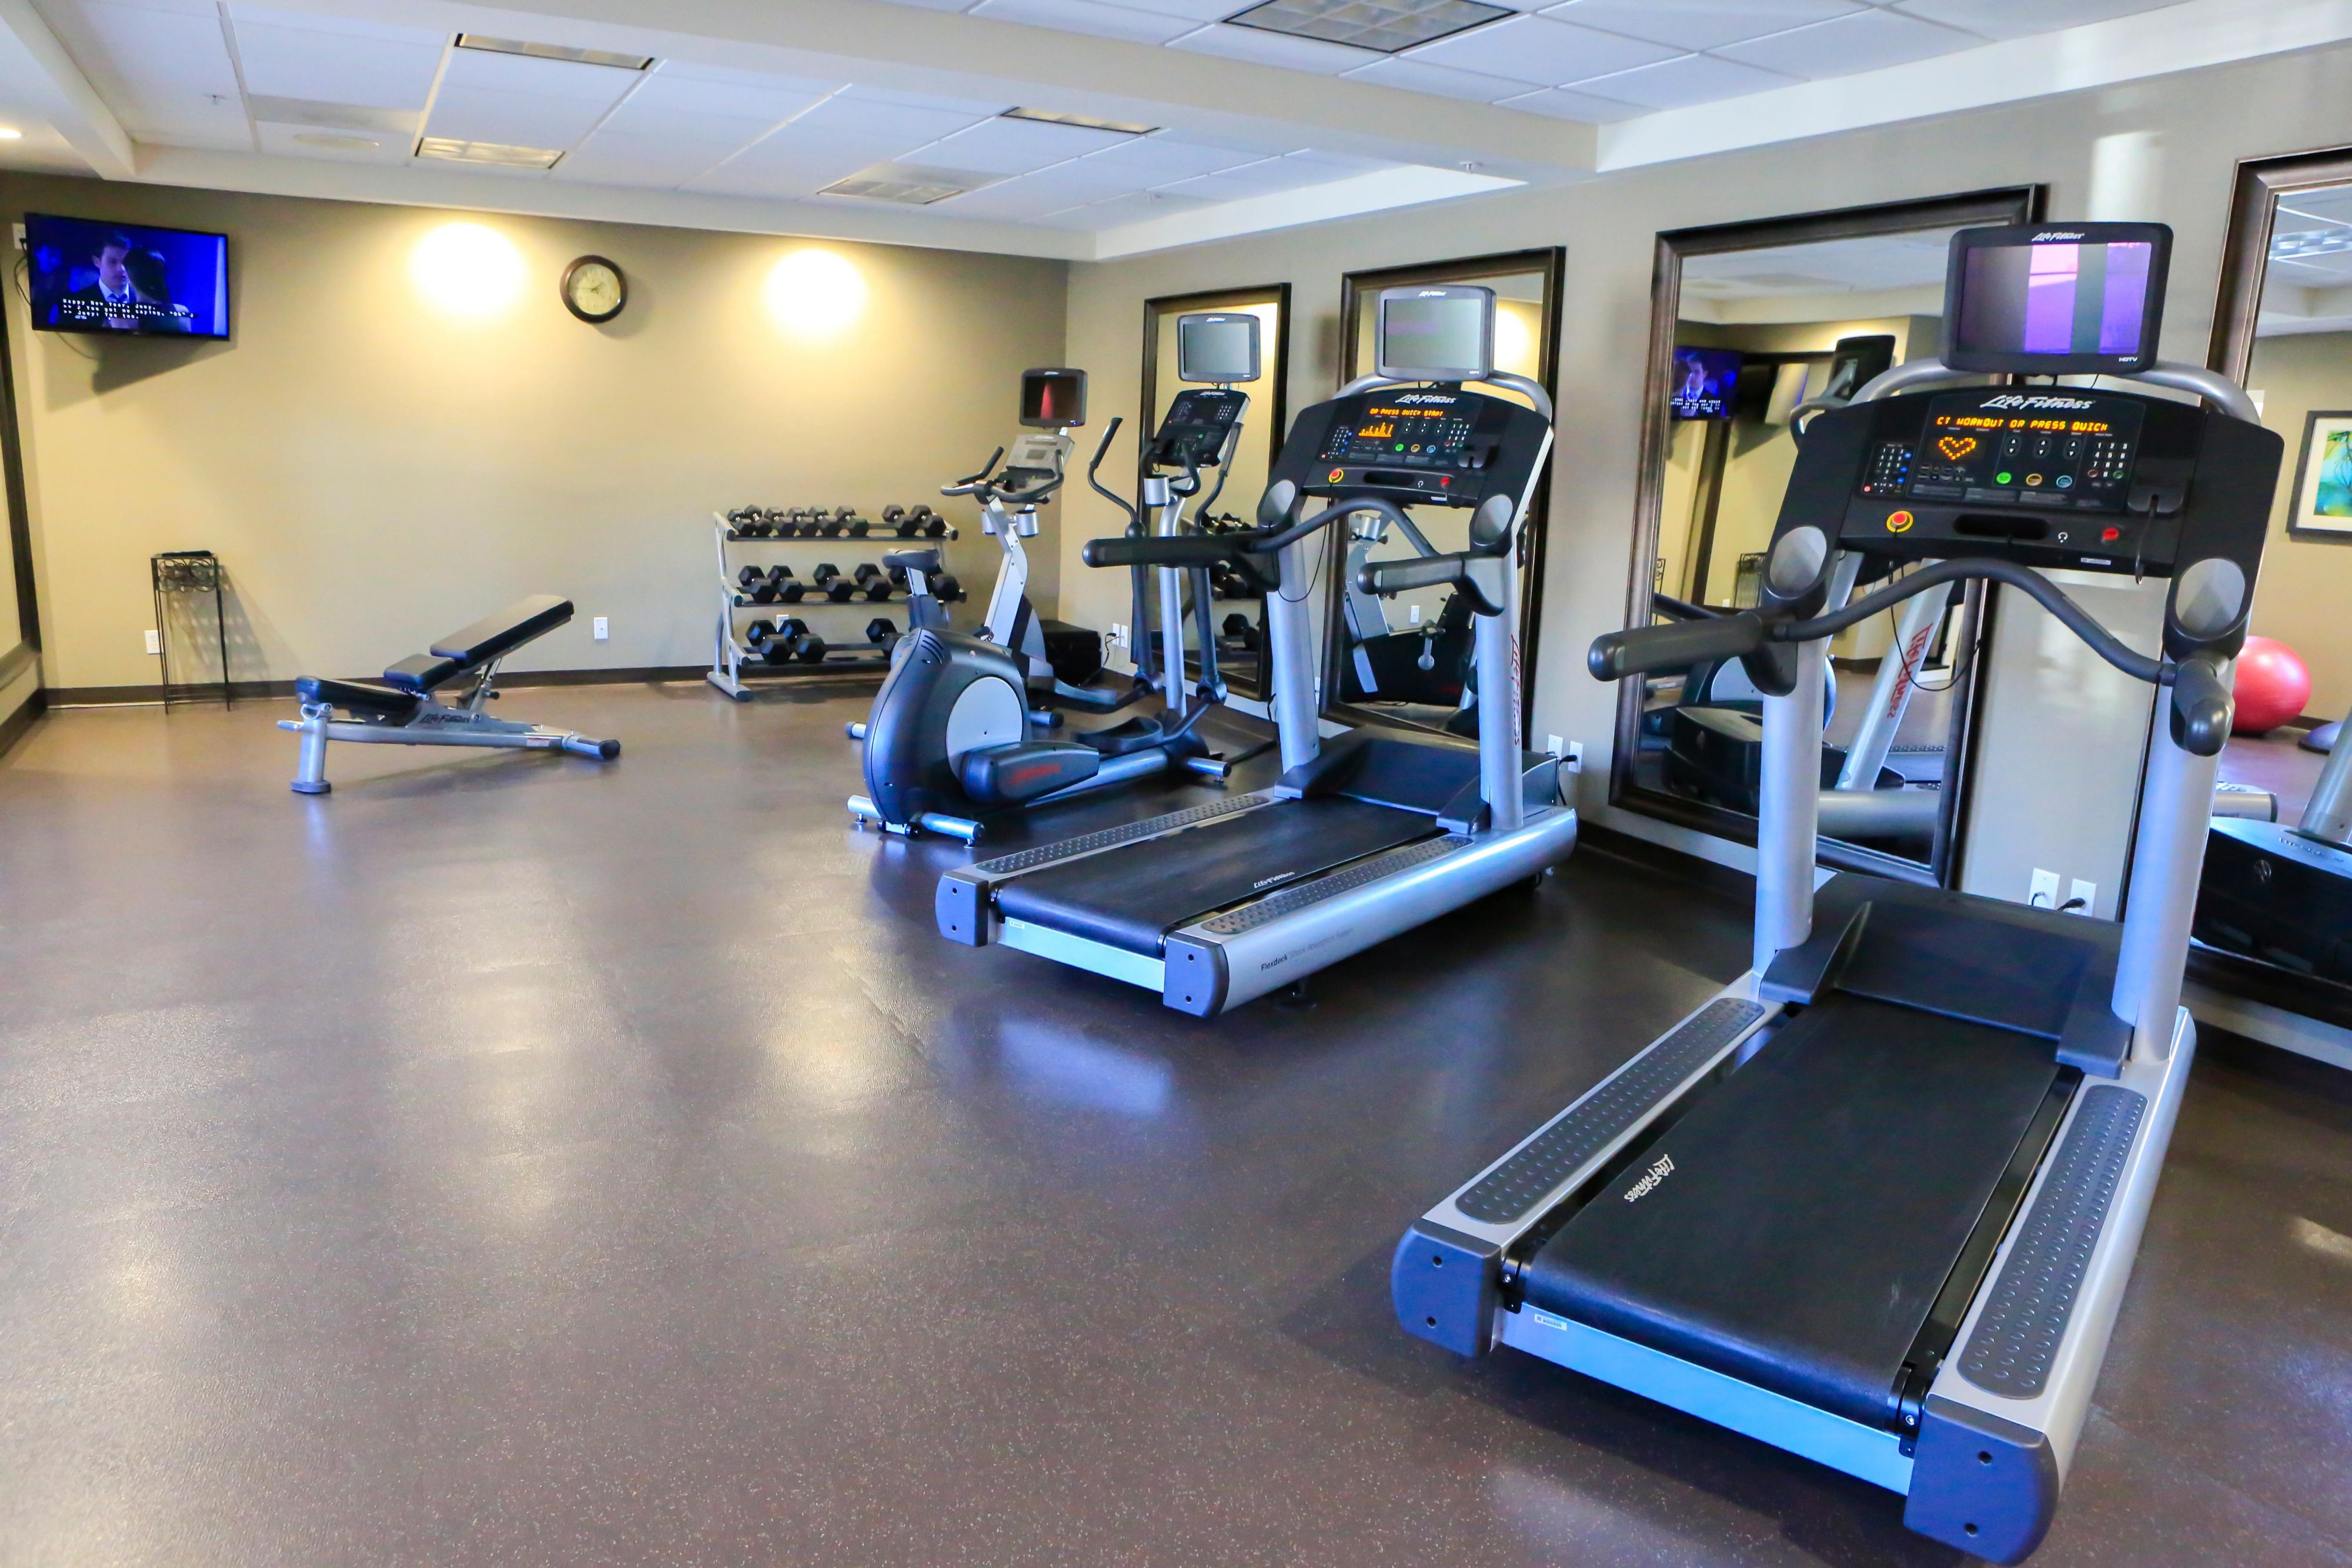 Keep to your daily workout in our fitness center.